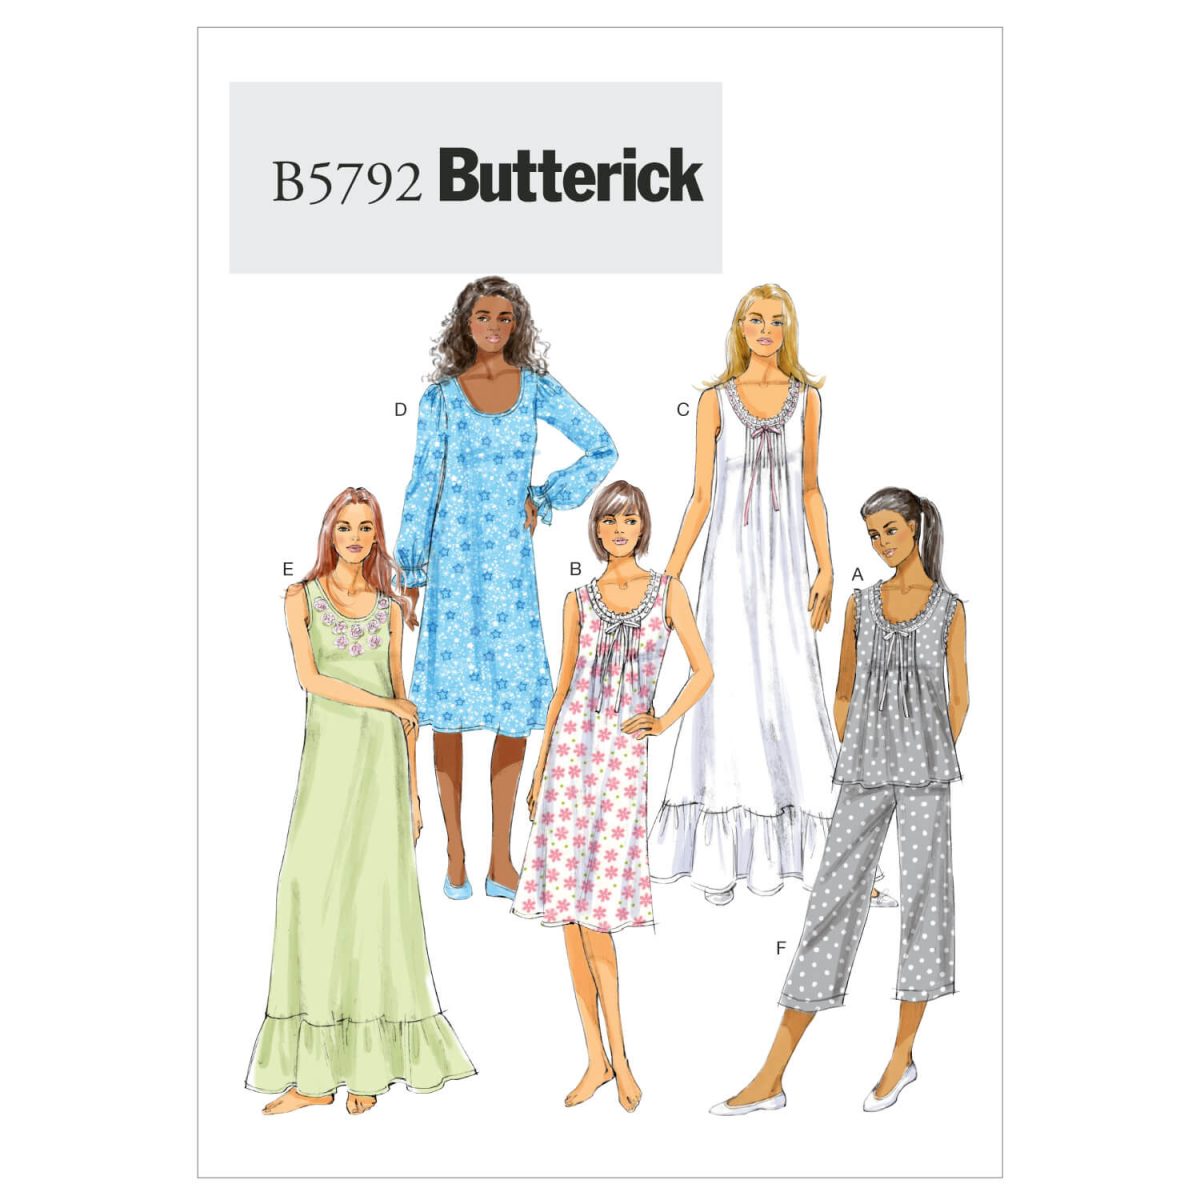 Butterick 5792 Misses' Nightwear Pattern Top, Gown and Pants from Jaycotts Sewing Supplies